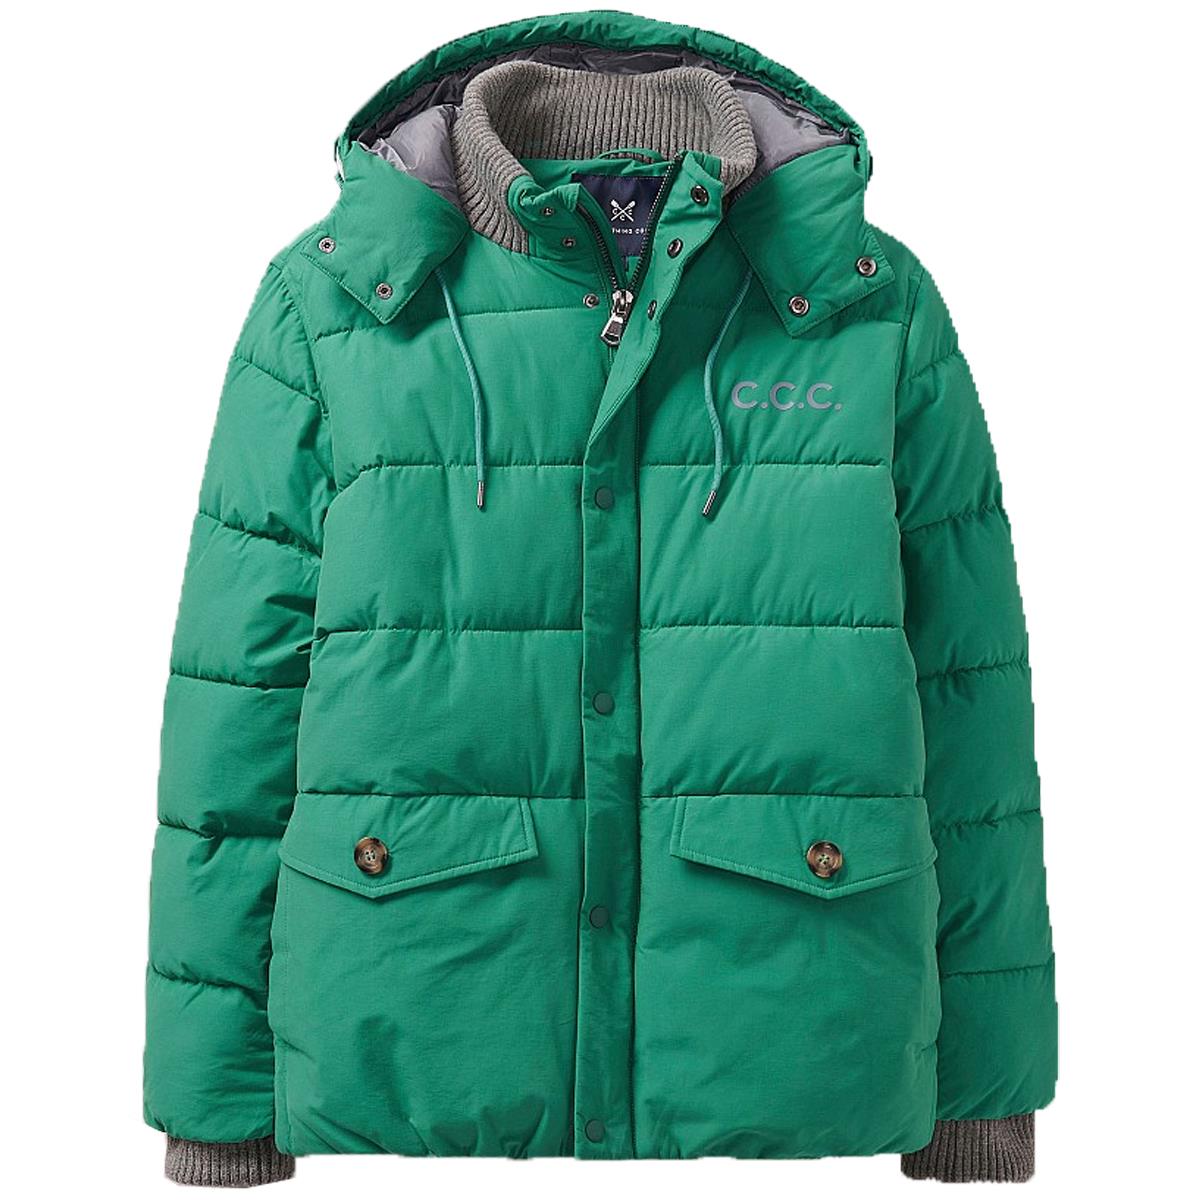 Crew Clothing Mens Ambleworth Jacket Questions & Answers